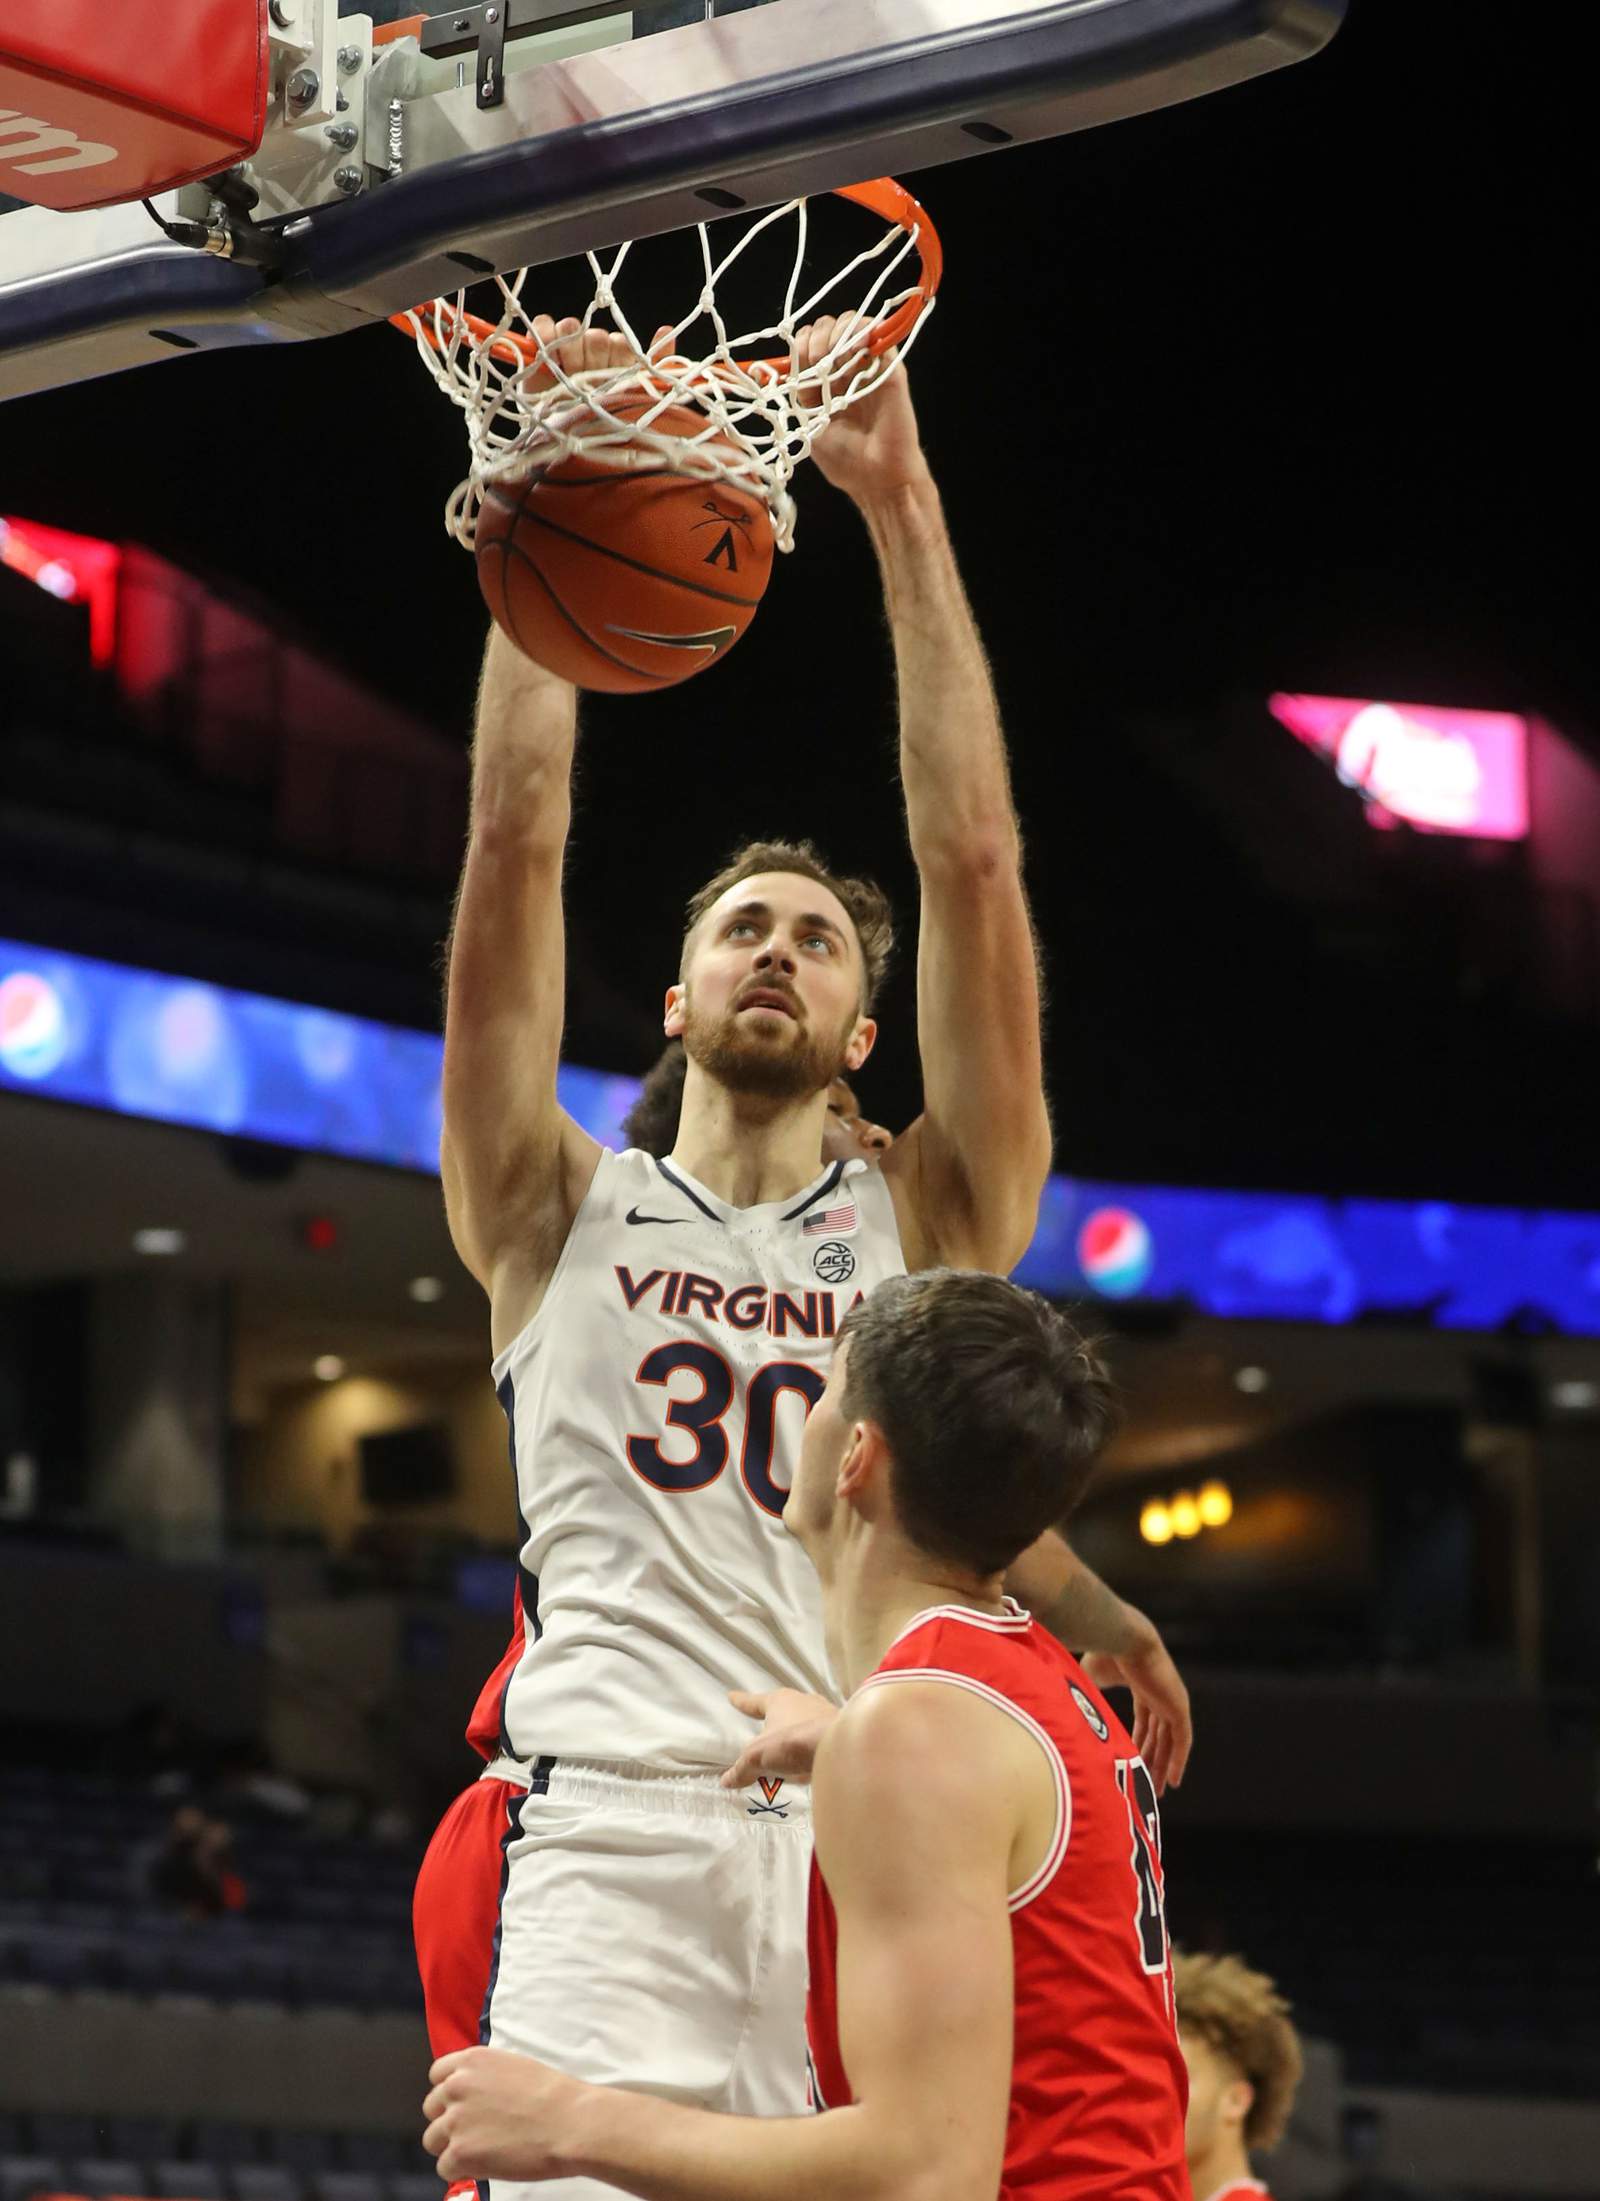 Huff’s 13 lead No. 15 Virginia past St. Francis (Pa), 76-51